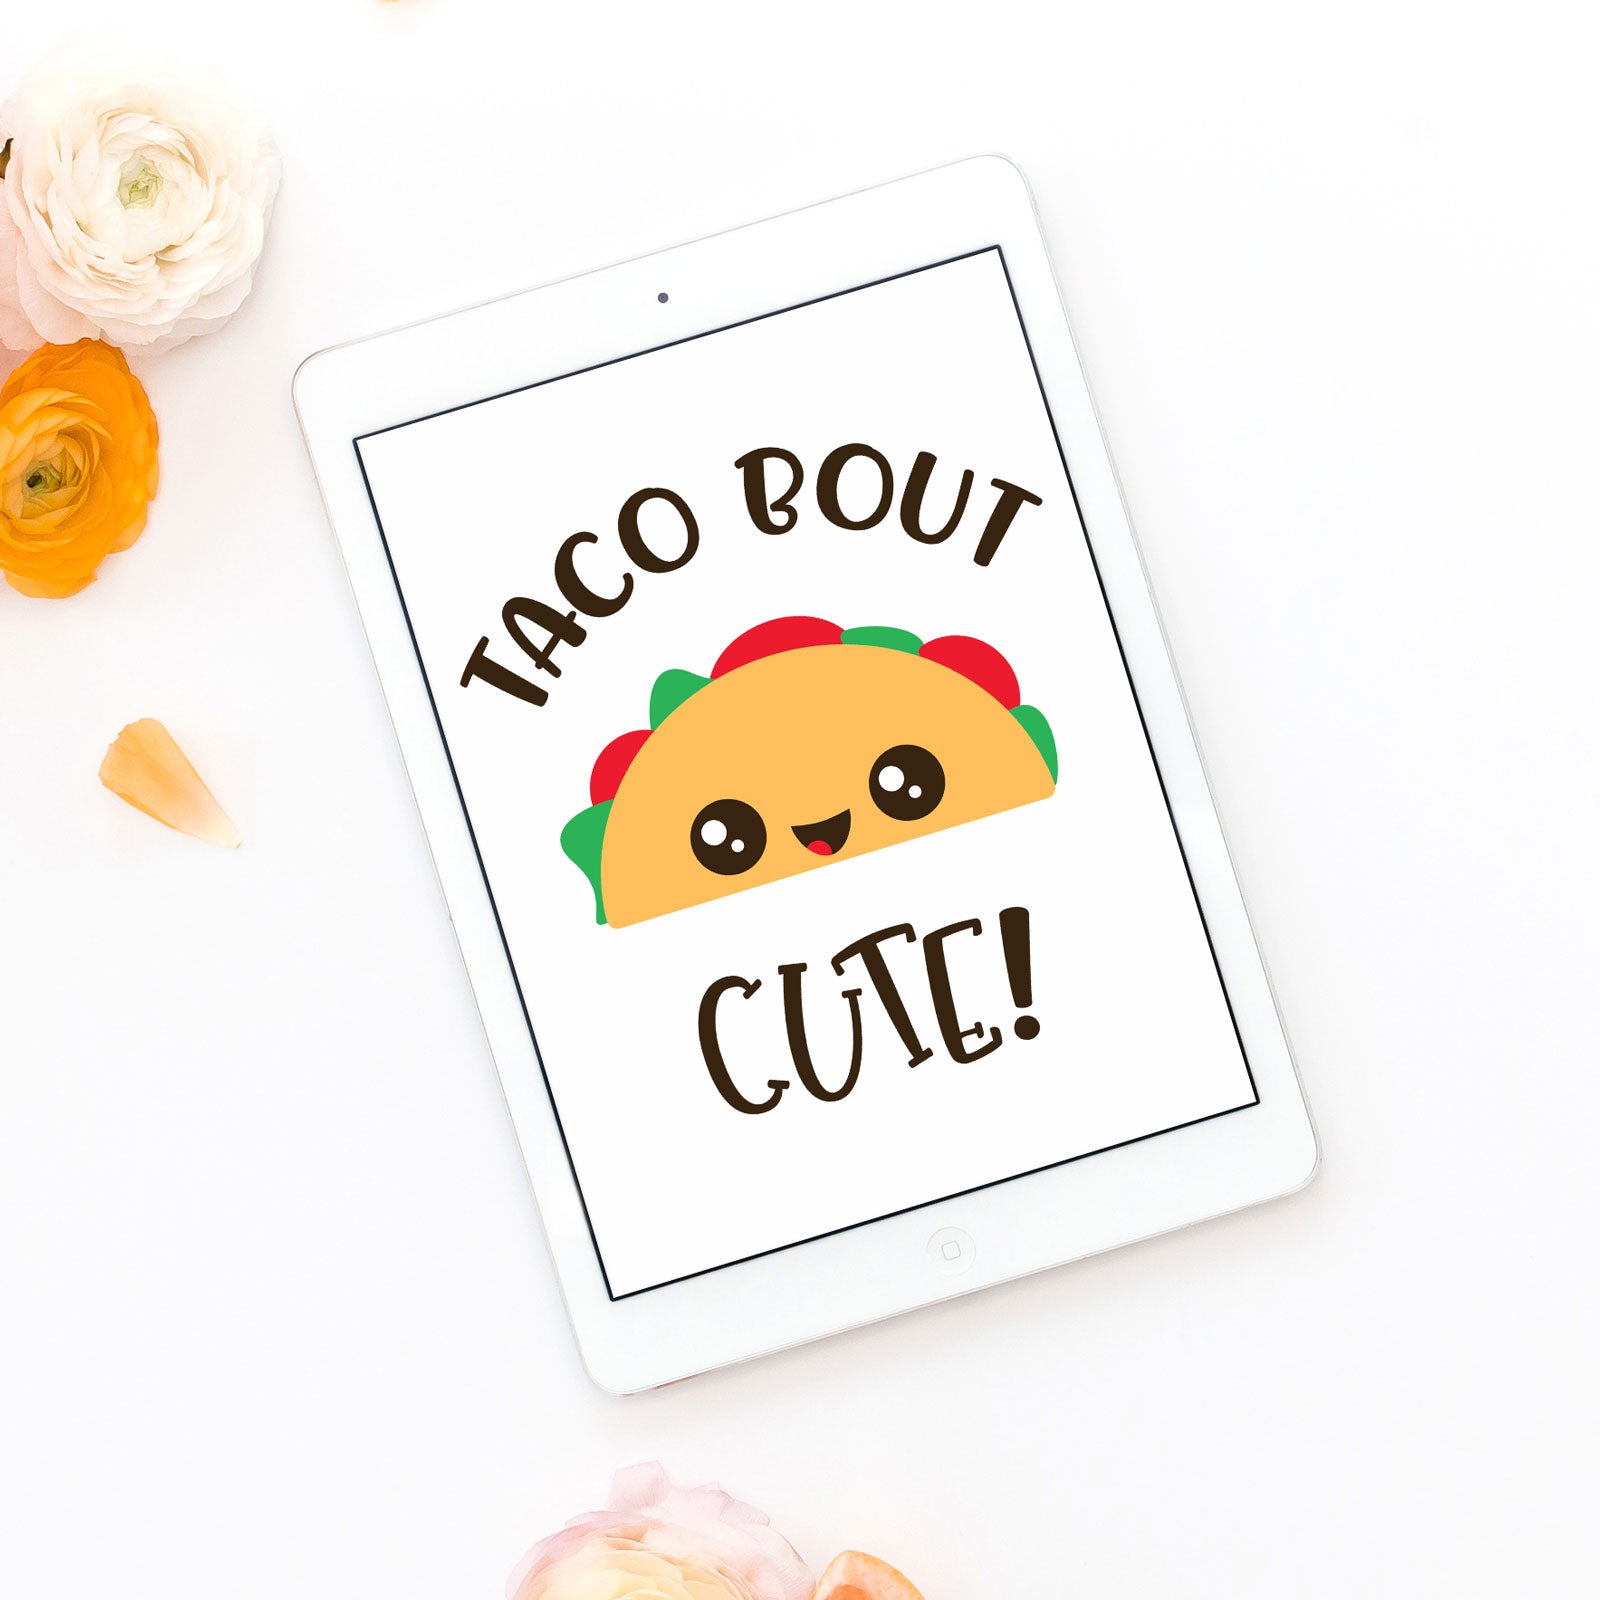 Freebie Friday svg cut file - Taco Bout Cute svg with cute smiling taco - Free for Personal Use